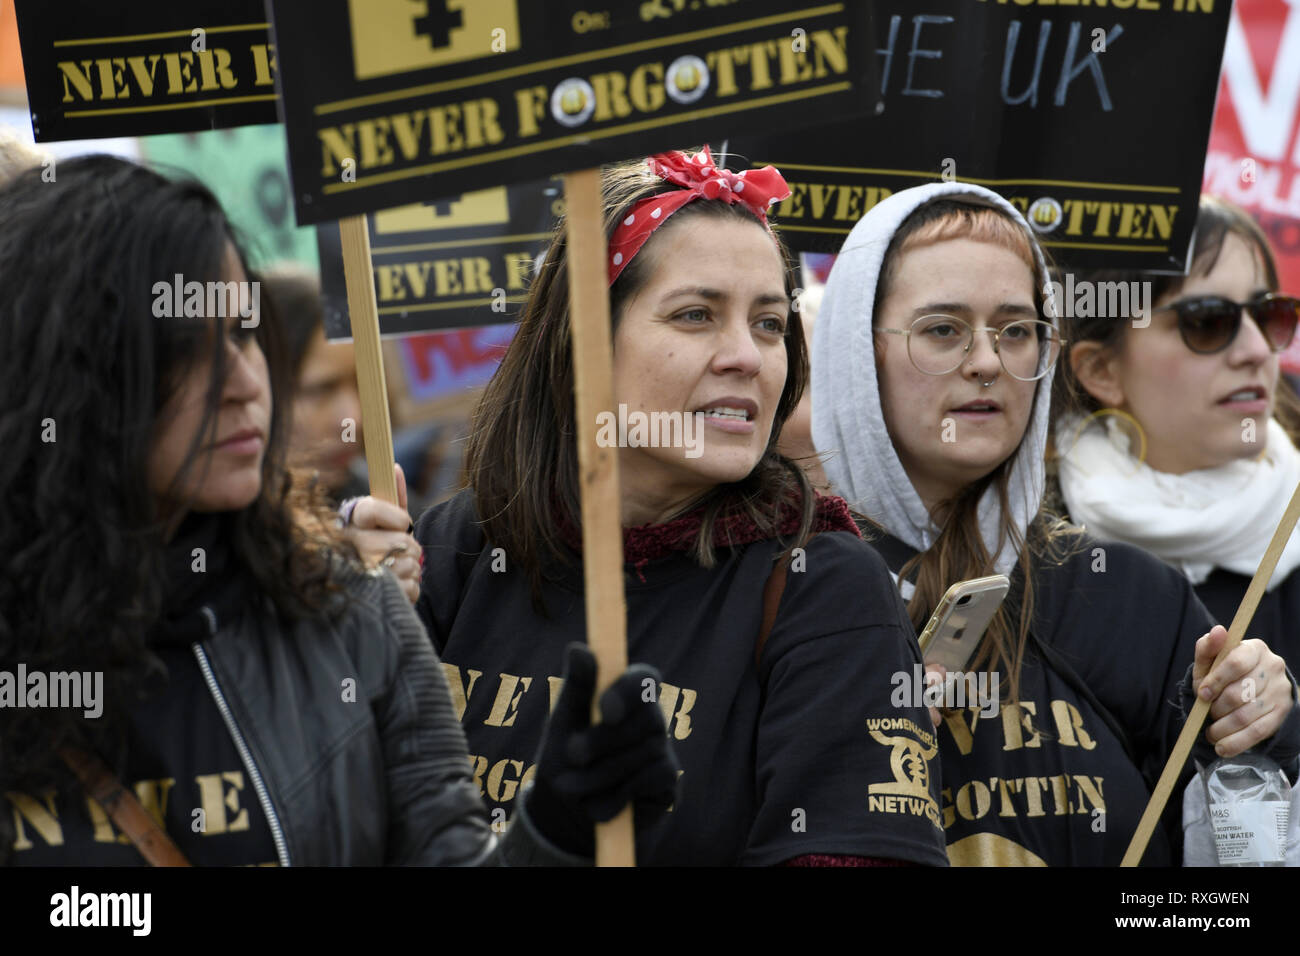 London, Greater London, UK. 9th Mar, 2019. Women seen holding placards during the Million Women's Rise march in London.Thousands of women marched through central London to a rally in Trafalgar Square in London demanding freedom and justice and the end of male violence against them. ''˜Never Forgotten' was the theme for this year's march and participants commemorated the lives of girls and women who have been killed by mens's violence. Credit: Andres Pantoja/SOPA Images/ZUMA Wire/Alamy Live News Stock Photo